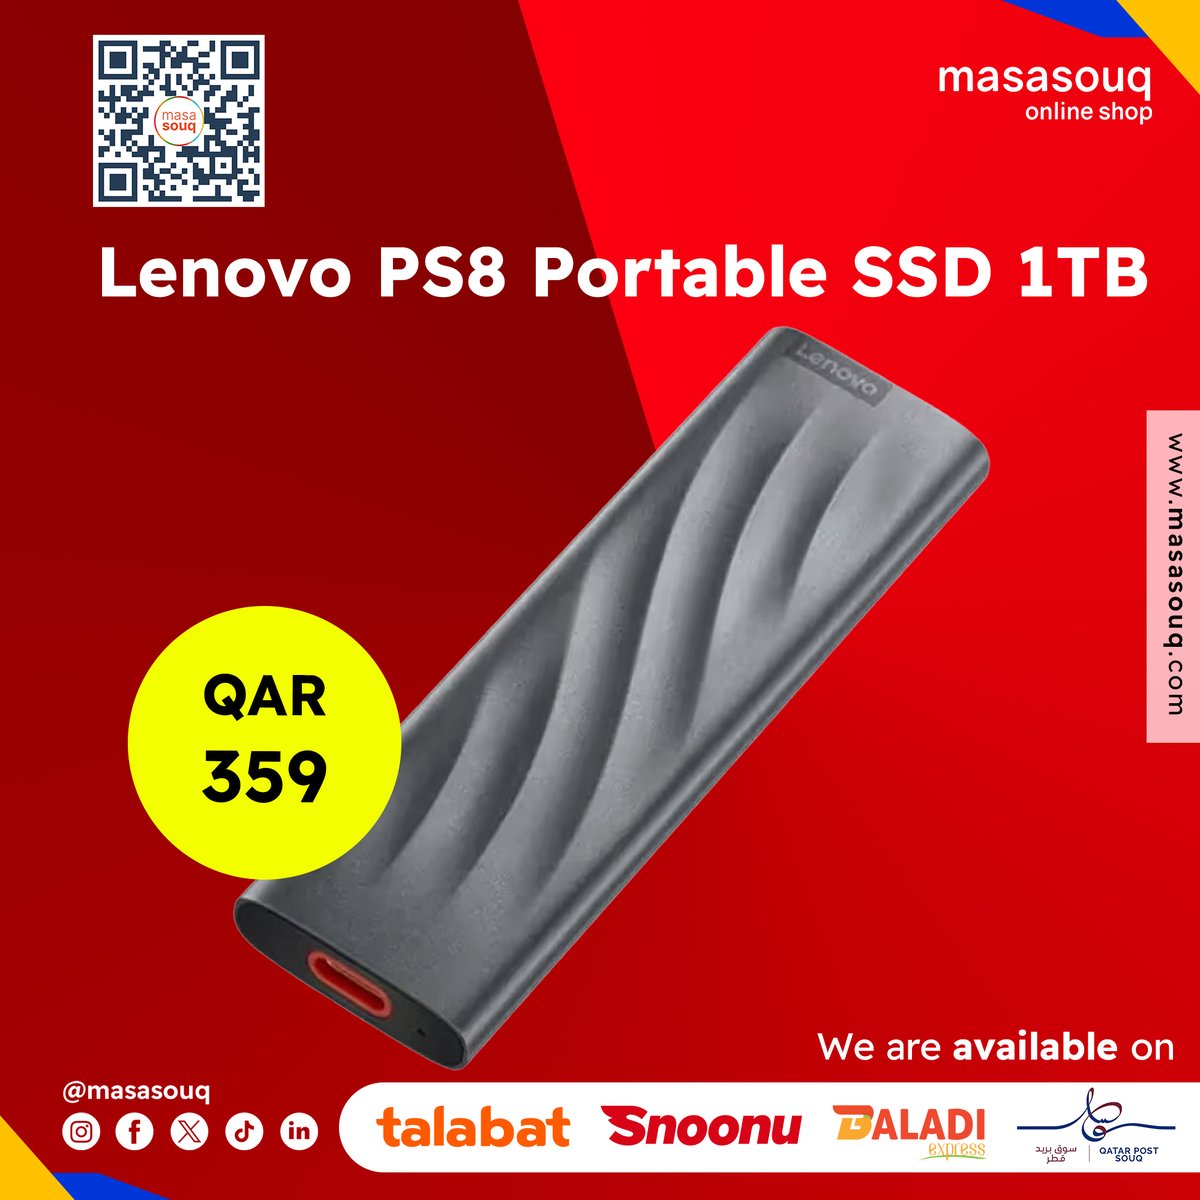 ⚡ Need lightning-fast storage on the go? The Lenovo PS8 Portable SSD (1TB) has arrived! 🚀 Get blazing transfer speeds for all your files.  Order yours today for just QAR359: masasouq.com/lenovo-ps8-por…  #Lenovo #SSD #portable #faststorage #tech #masasouq